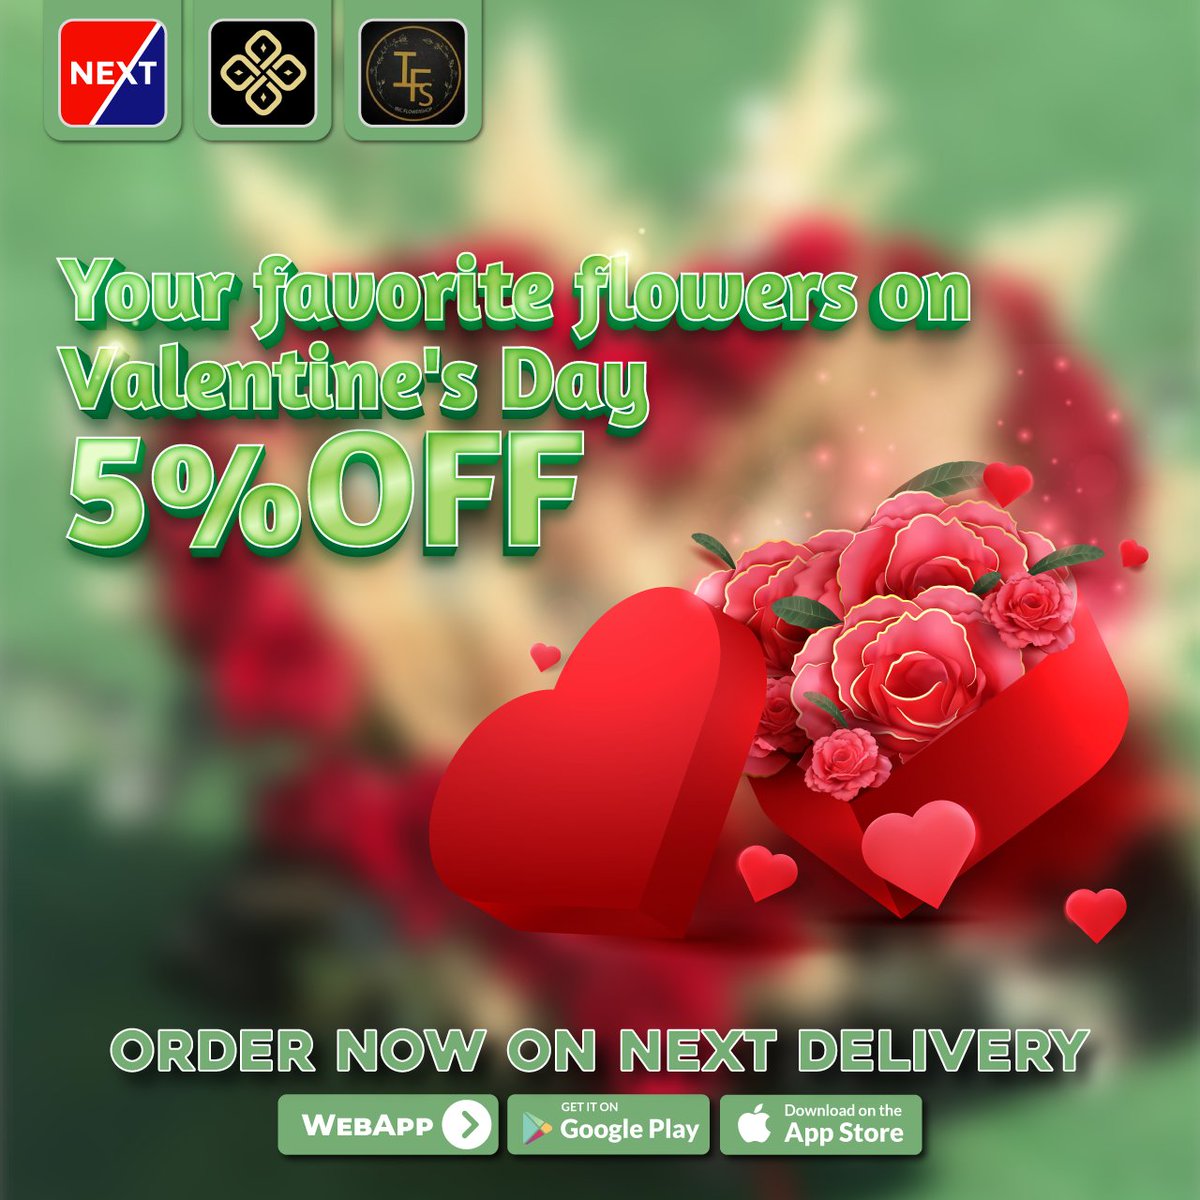 Your favorite flowers on valentine's day 5% OFF
INSTALL & ORDER NOW onelink.to/nextdelivery
#valentineday #valentinesgift #valentines2022 #nextdelivery